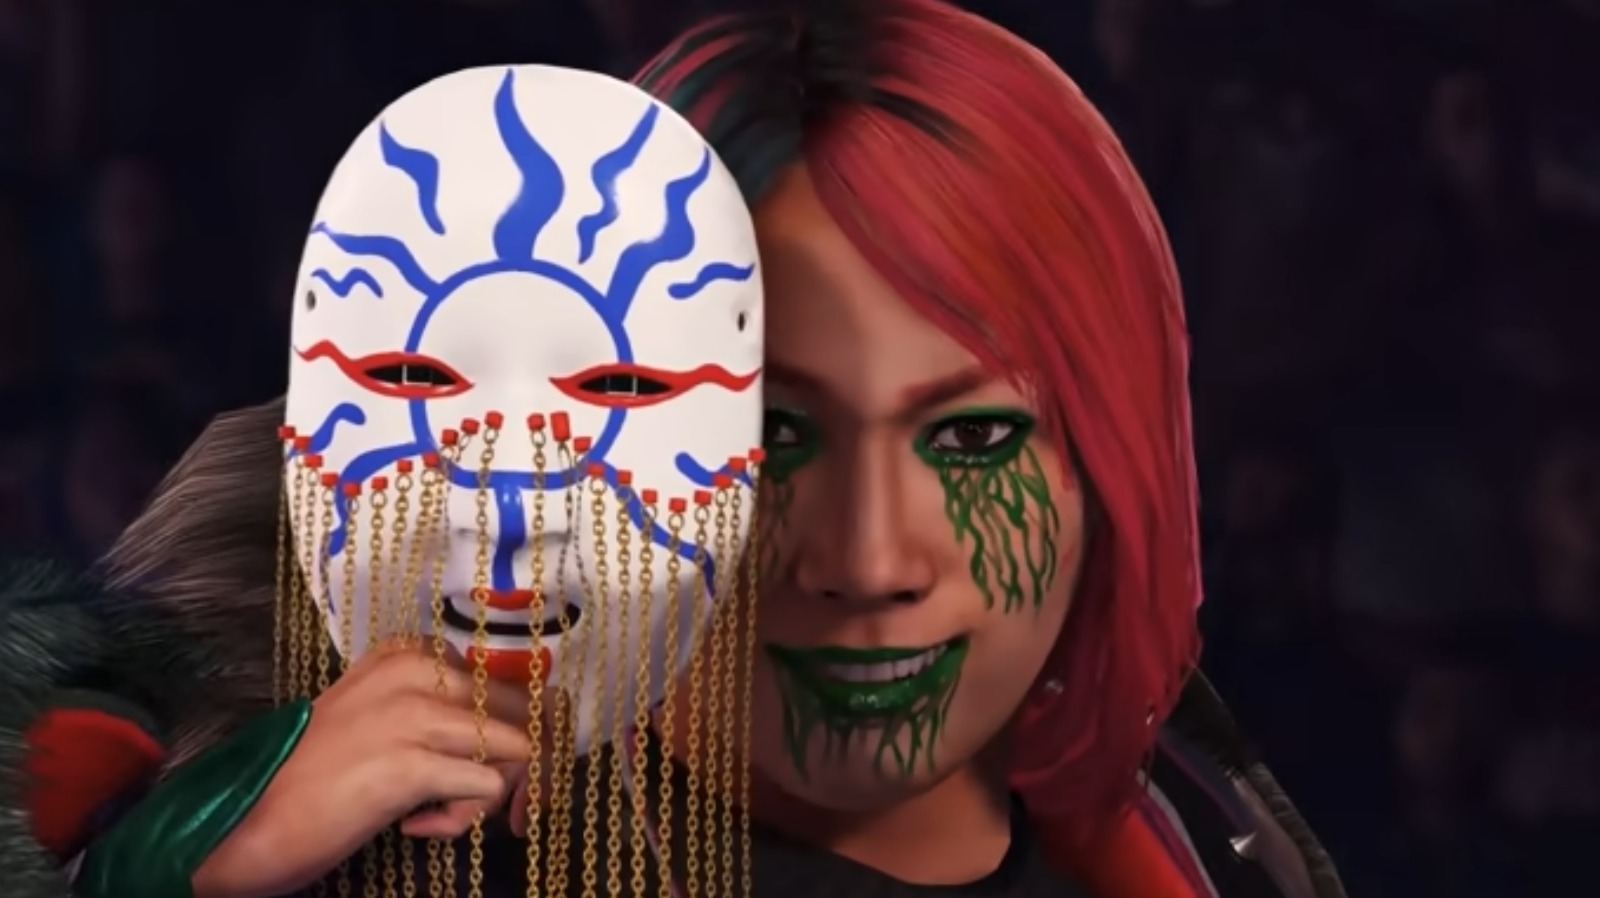 There is a mod available to unlock all the facepaints on pc. : r